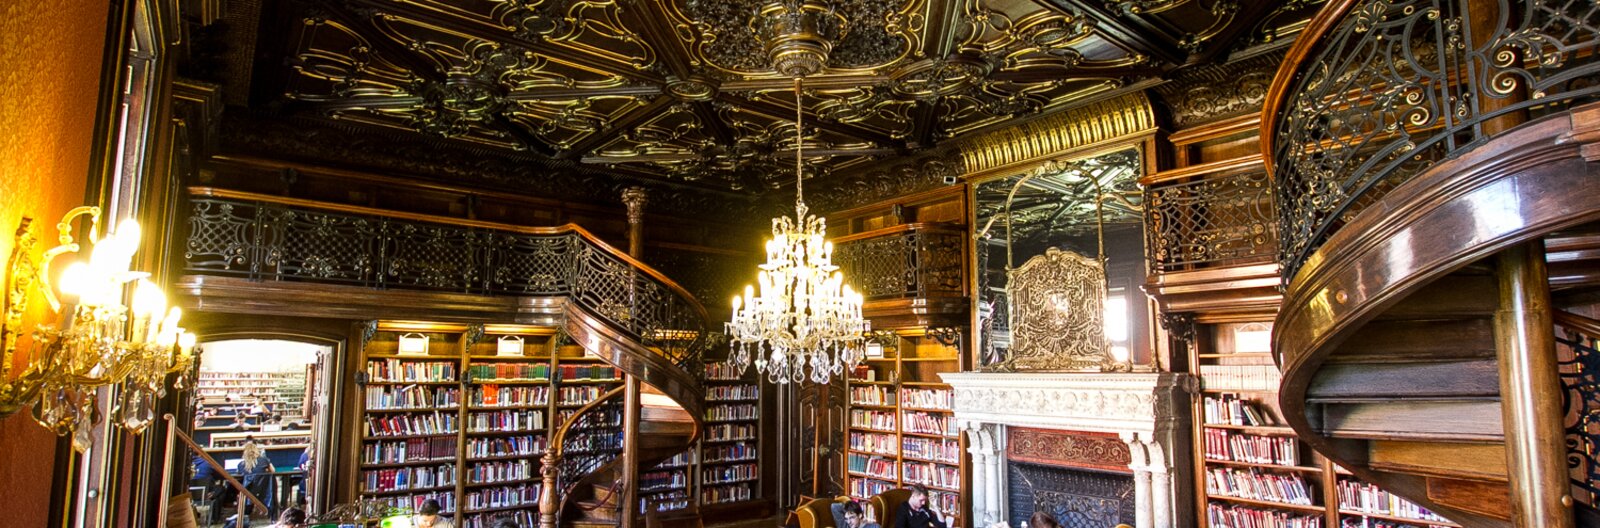 13 of the most beautiful libraries in Budapest